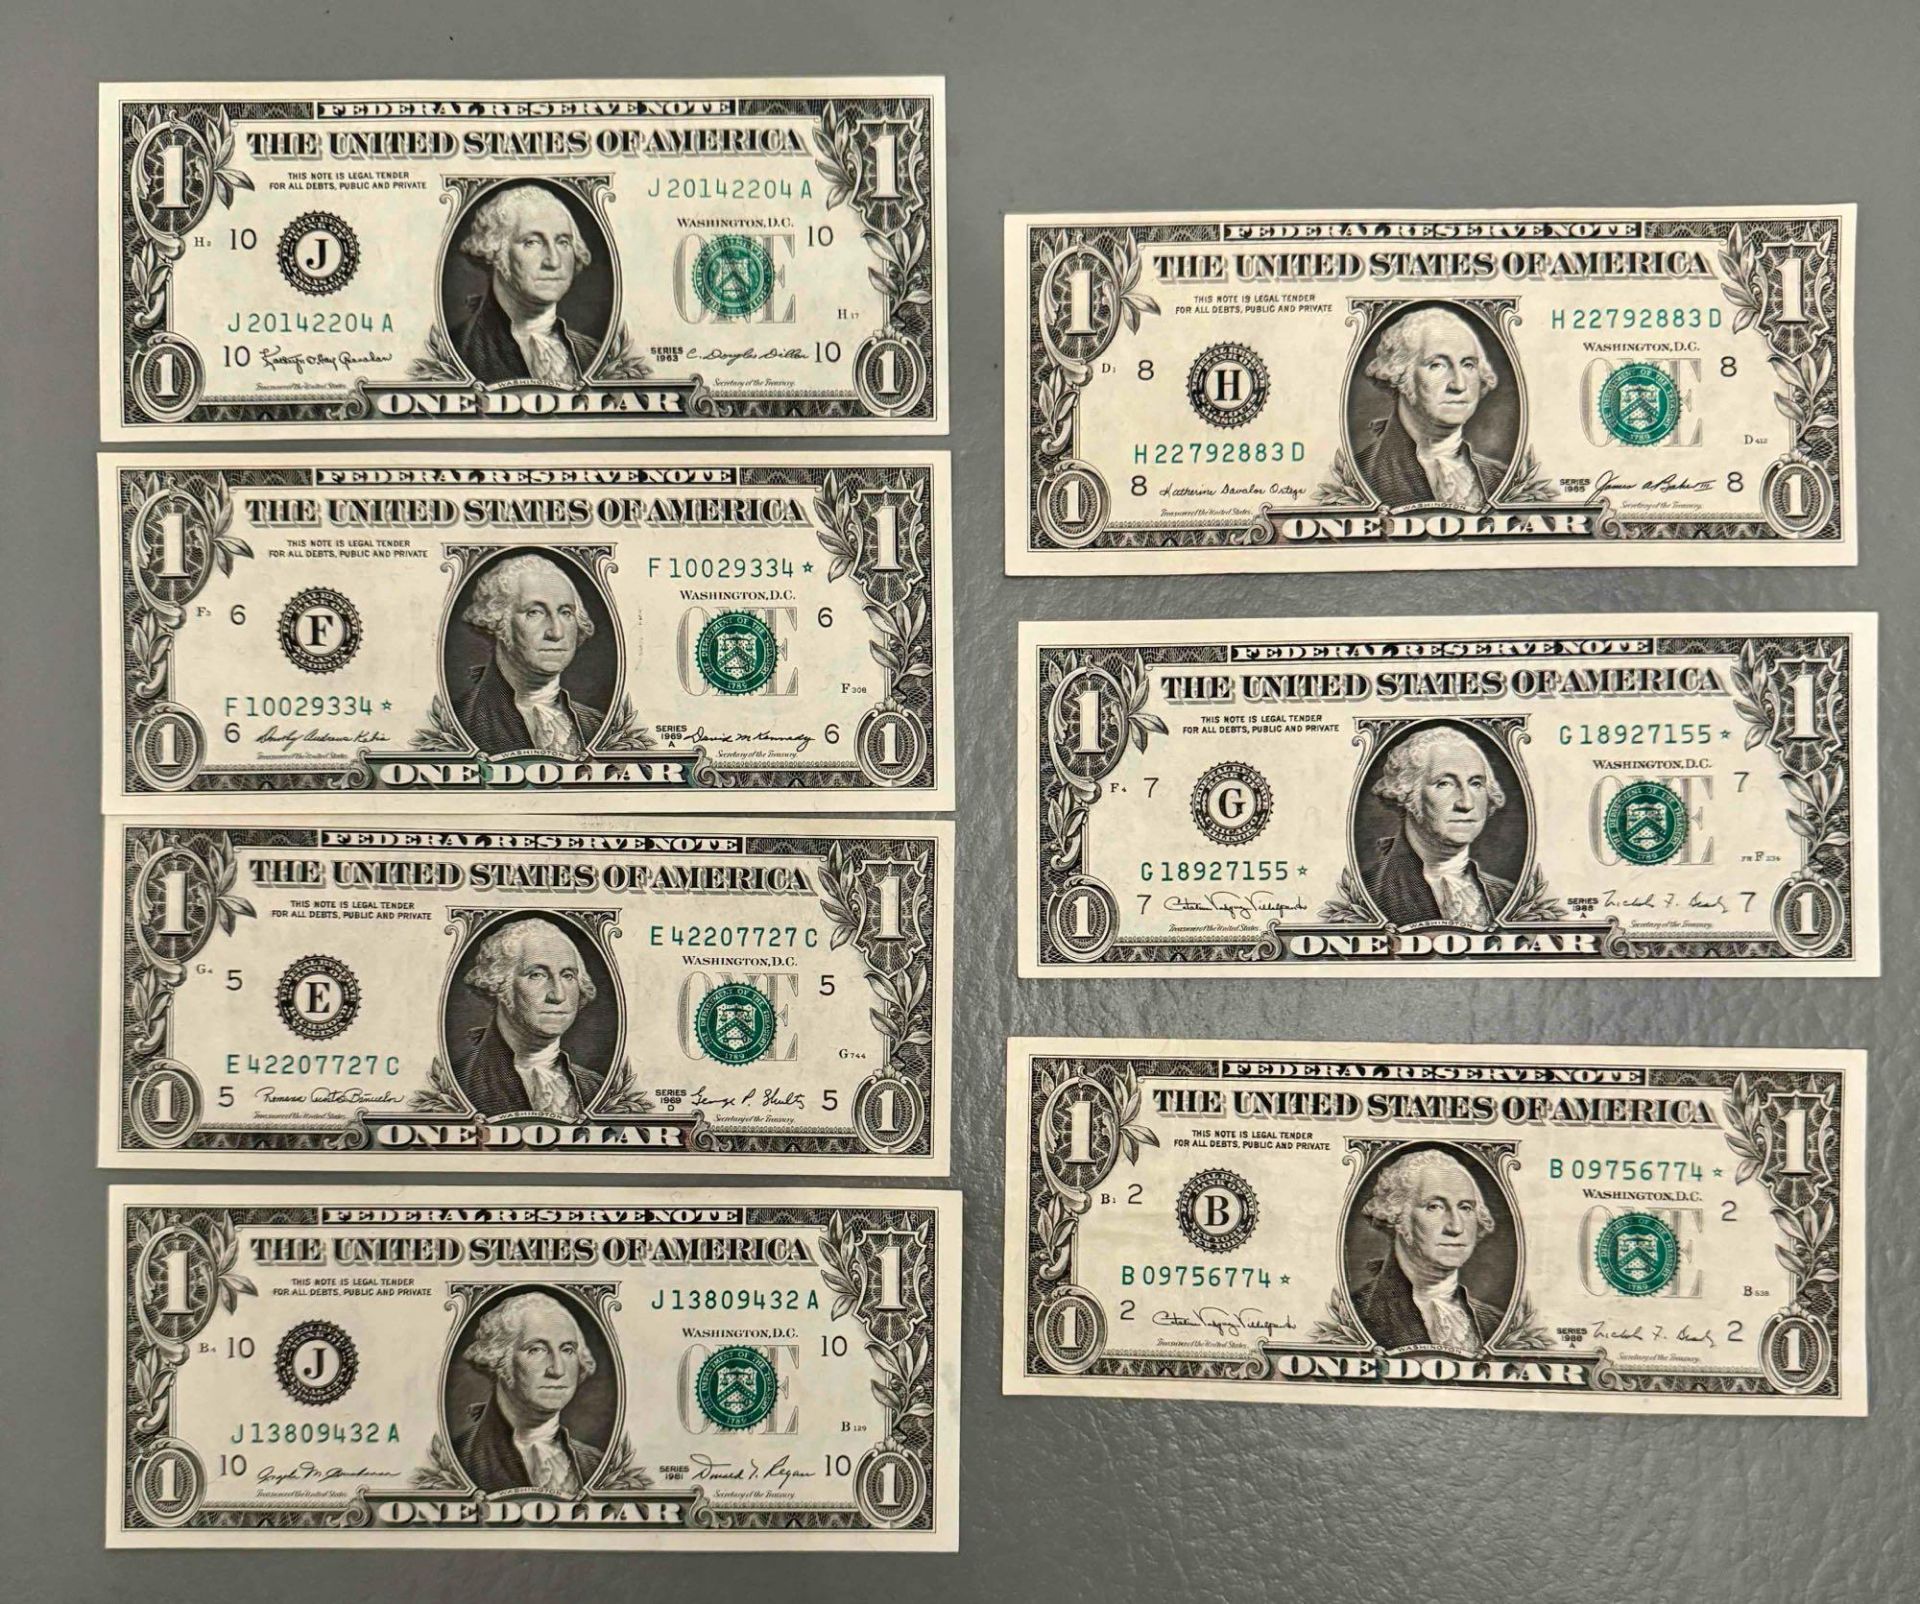 Currency uncirculated notes: 1999 $10 Star Note, 1976 First Day issue w/stamp $2 note, 1963 $1 Note, - Image 2 of 6